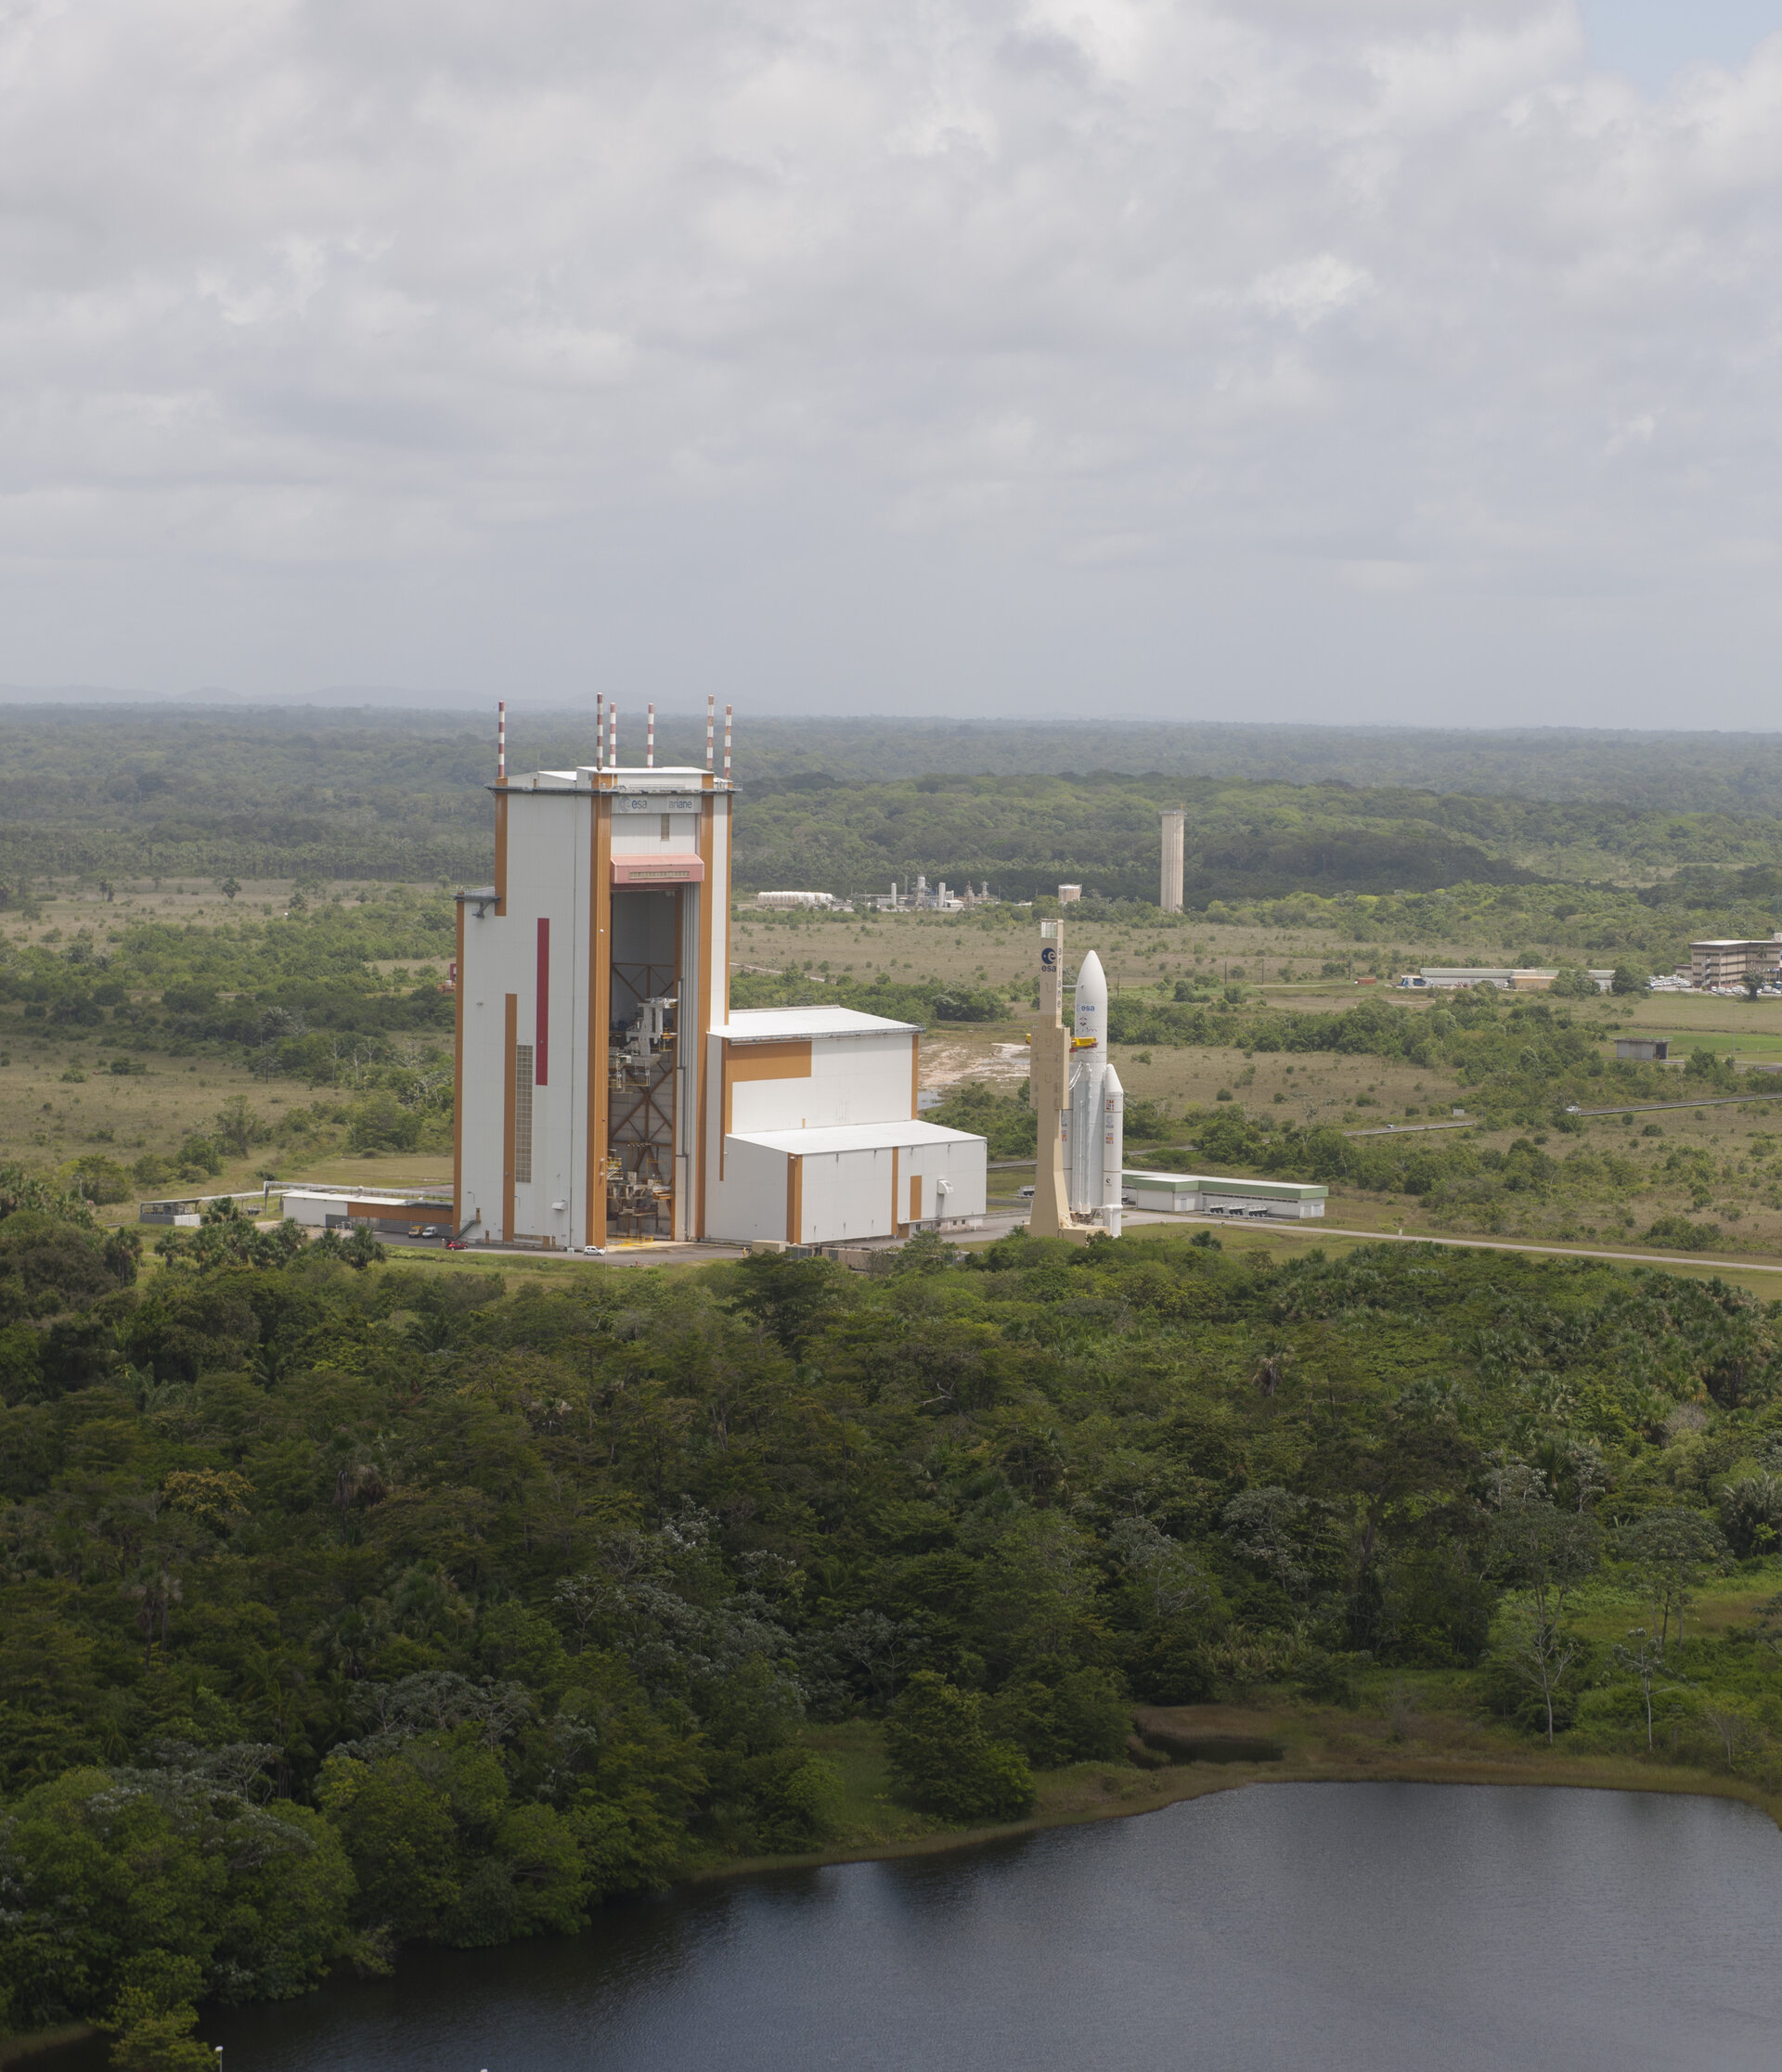 Ariane 5 VA 213 during transfer from BAF to the launch pad